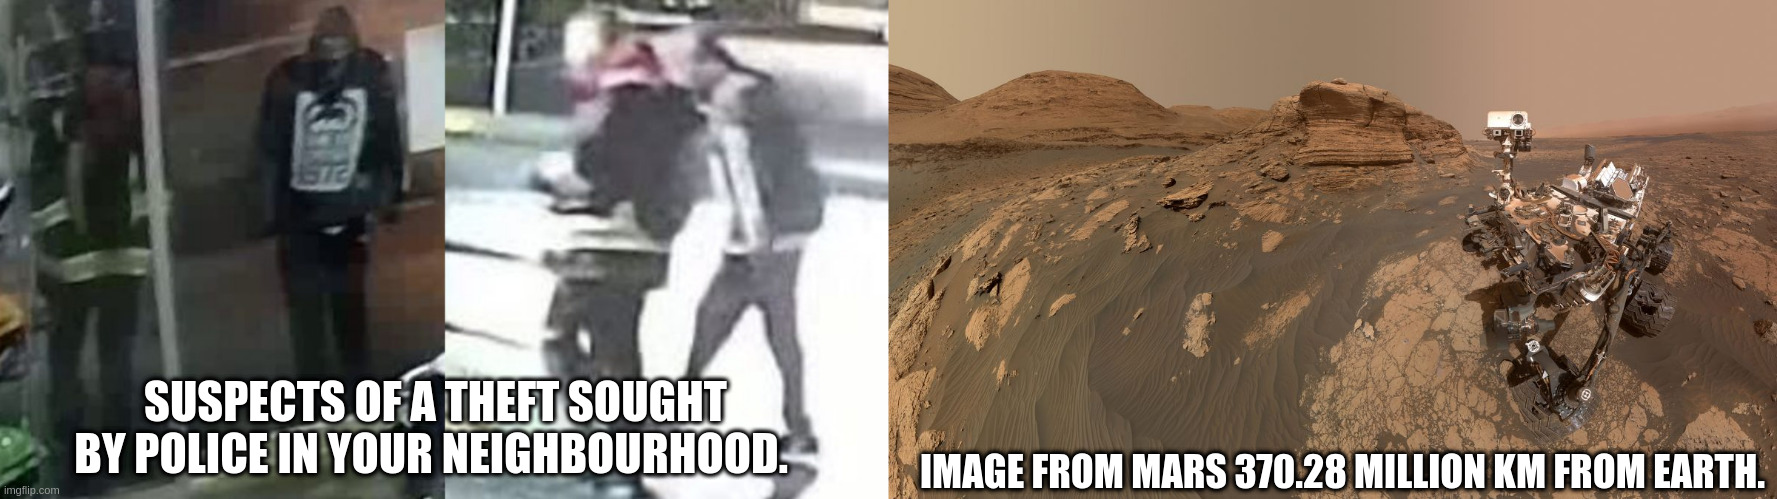 Bad image. Theft, Crackheads. | IMAGE FROM MARS 370.28 MILLION KM FROM EARTH. SUSPECTS OF A THEFT SOUGHT BY POLICE IN YOUR NEIGHBOURHOOD. | image tagged in mars | made w/ Imgflip meme maker